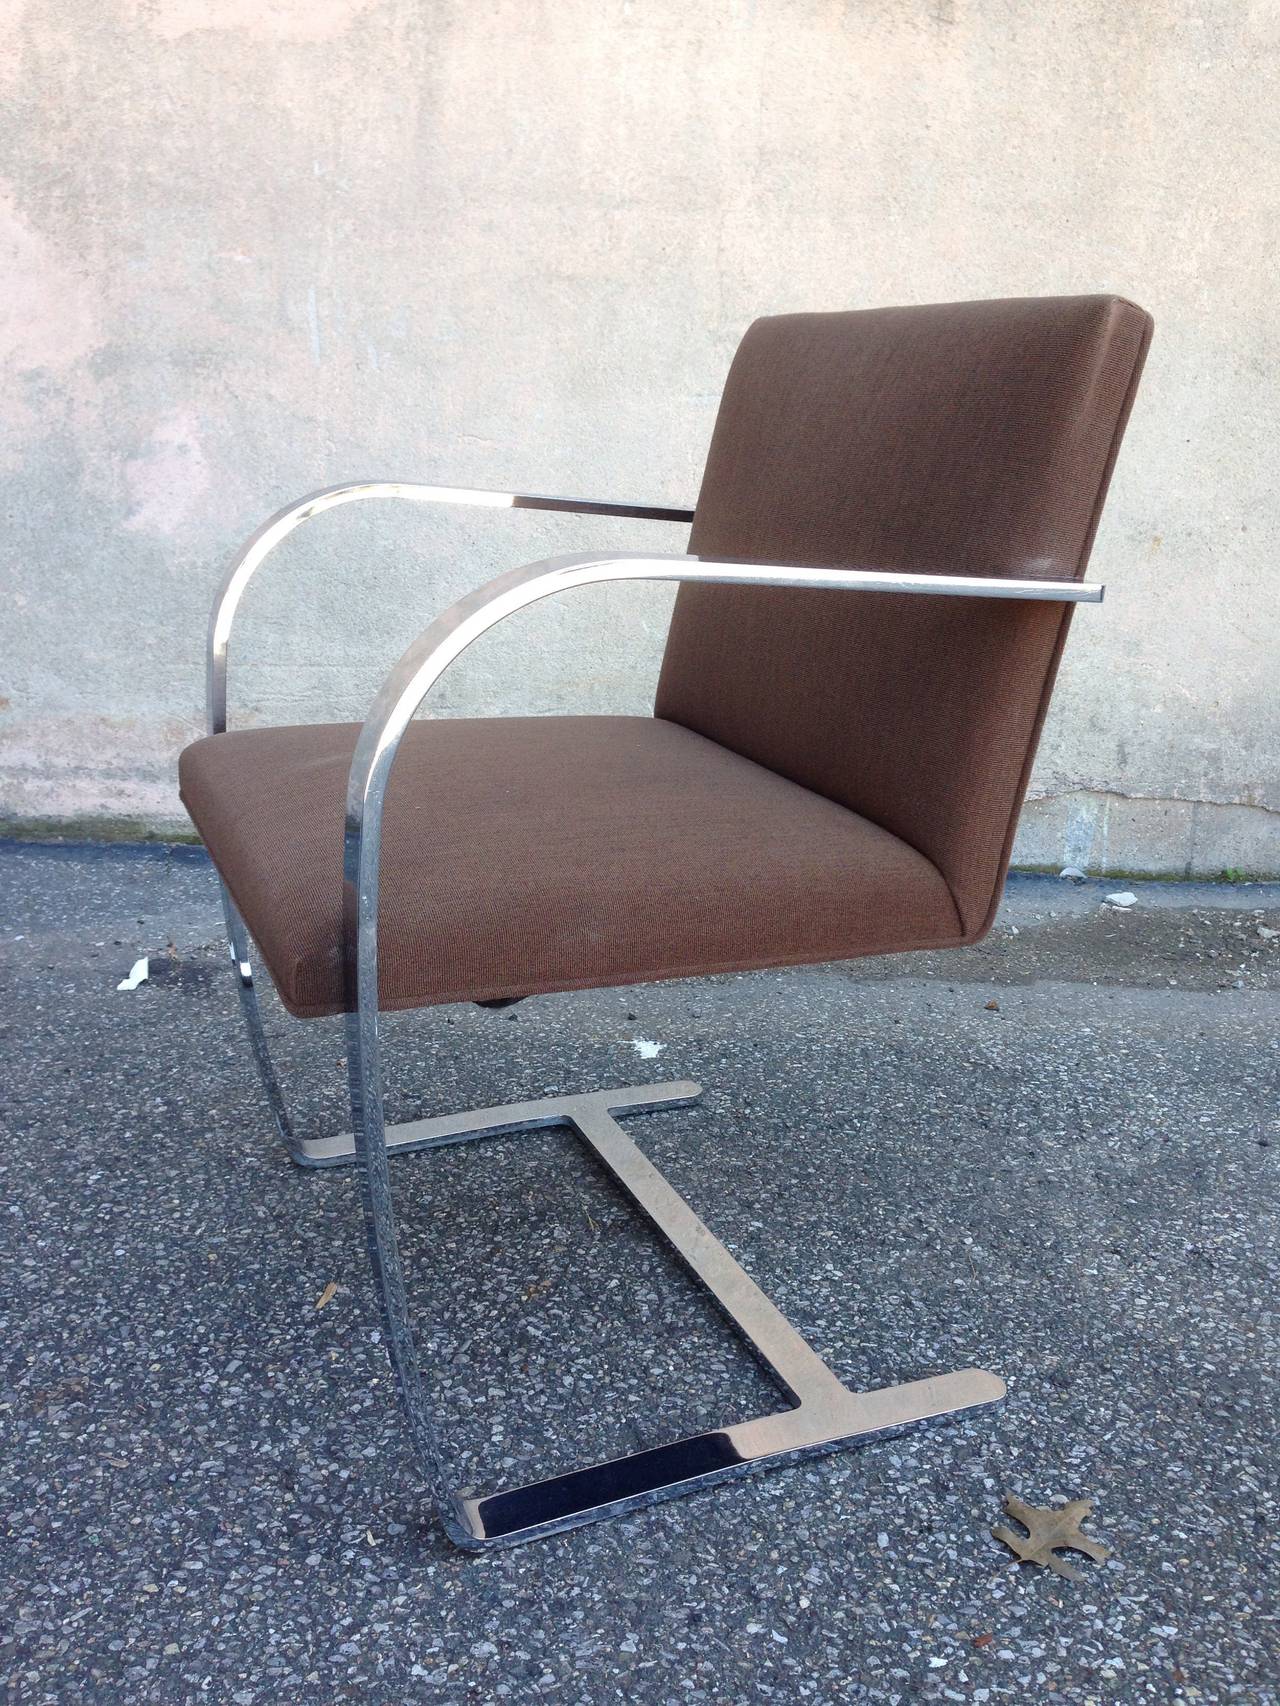 Art Deco One Two or Three Brno Mid-Century Mies van der Rohe Arm Chairs For Sale